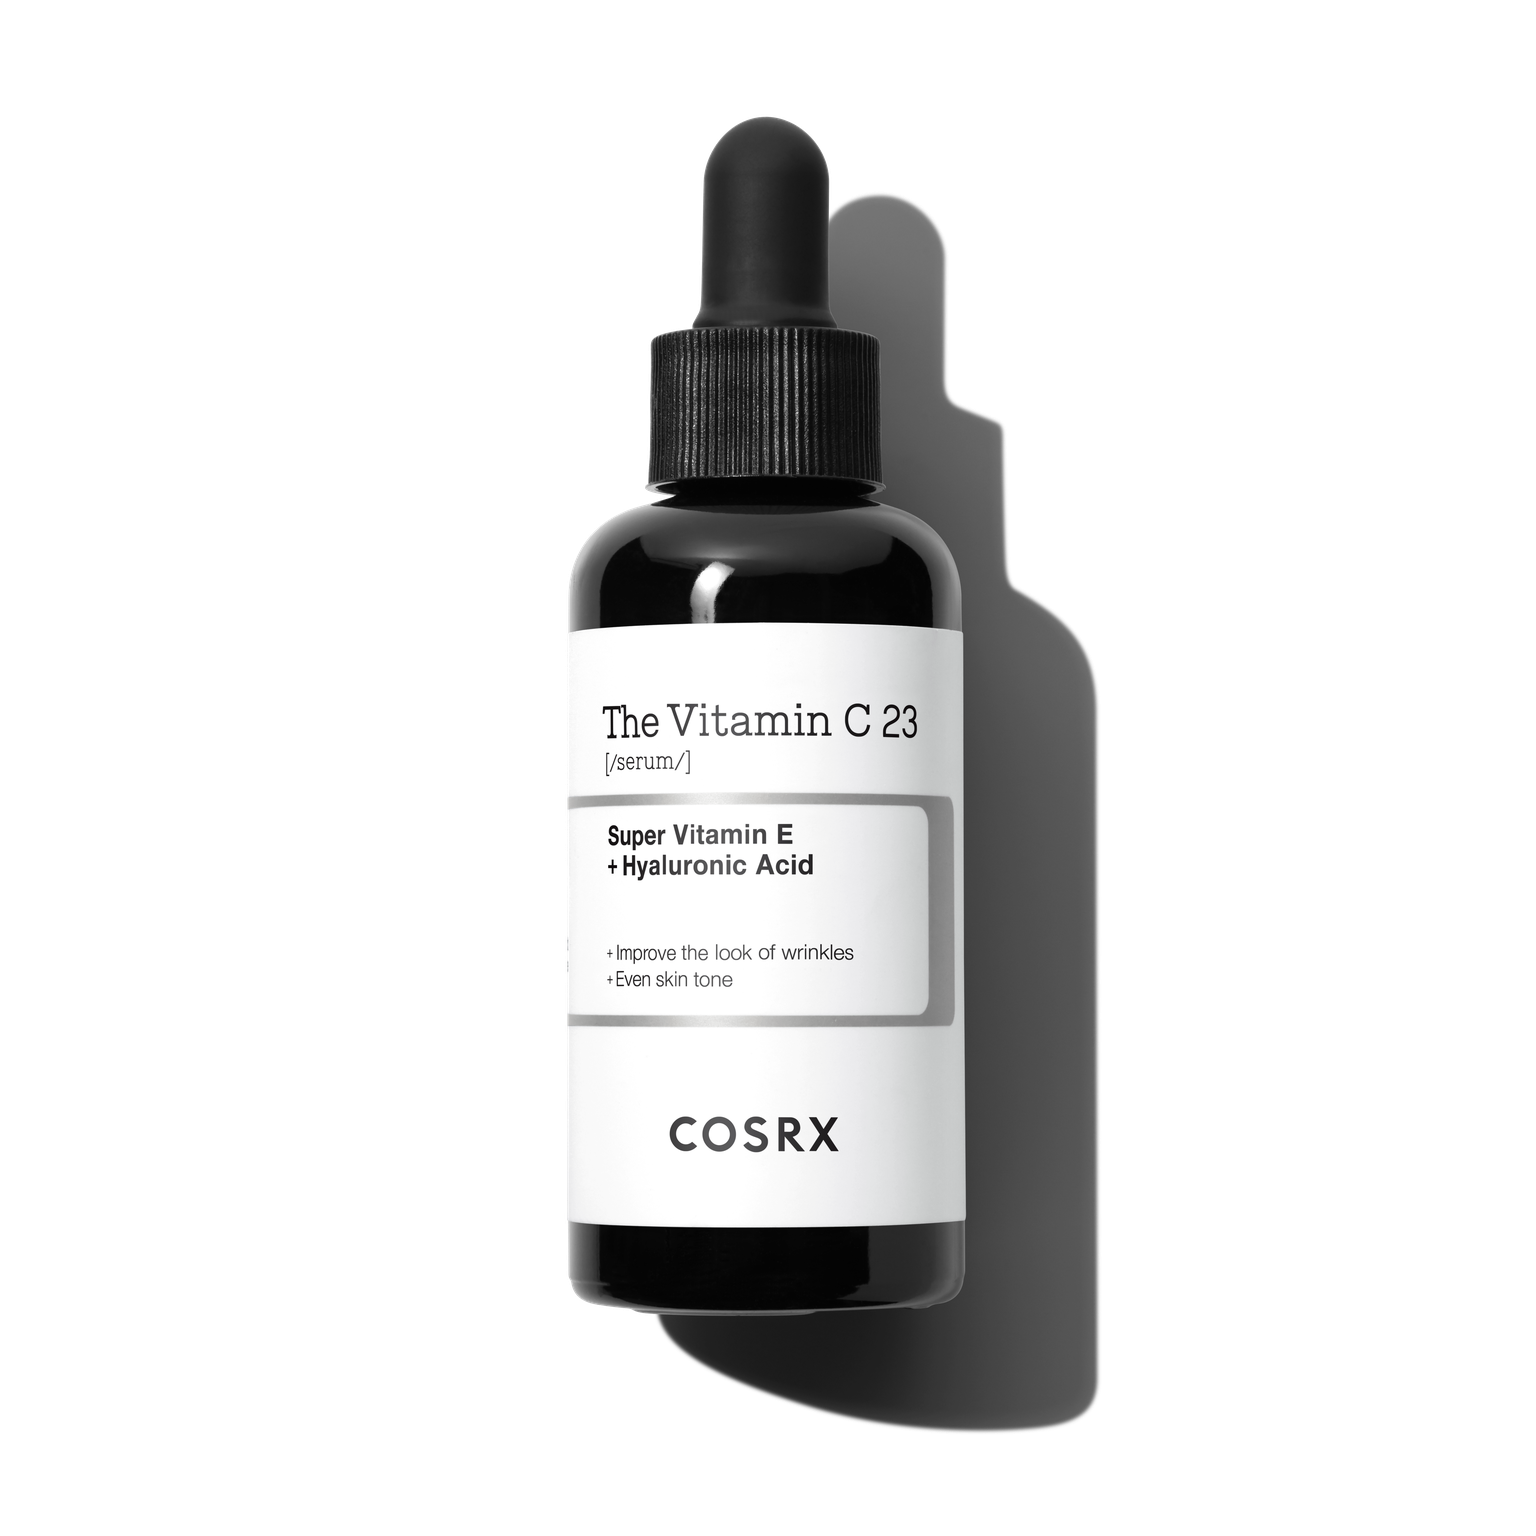  To finish off the festival season and those endless nights of vacationing, everyone needs a little reset, so naturally, skincare is on our list of Spring must-haves! The   COSRX   Vitamin C 23 Serum  ($25)  is a daily treatment that is best suitable